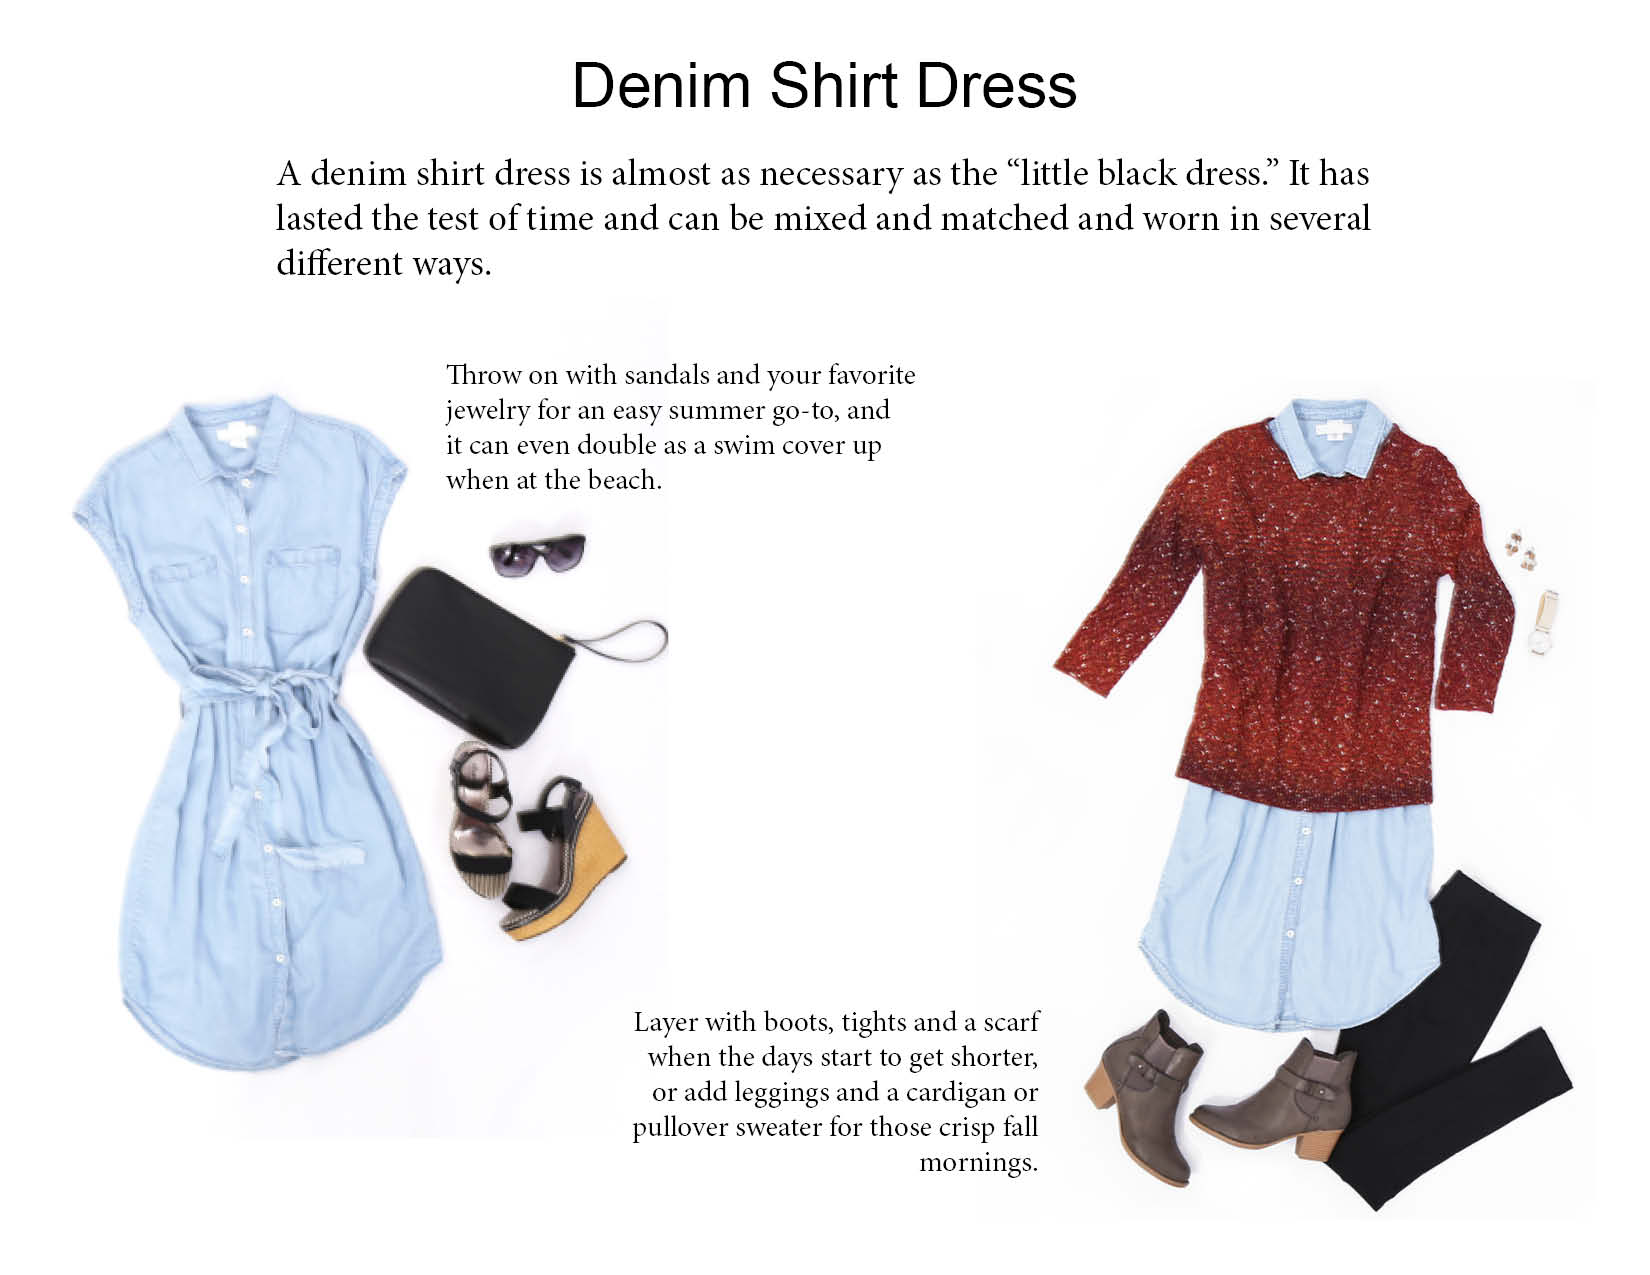 a denim dress is an essention in any wardrobe. Cute with sandles in the heat and layered under a sweater in cooler months.